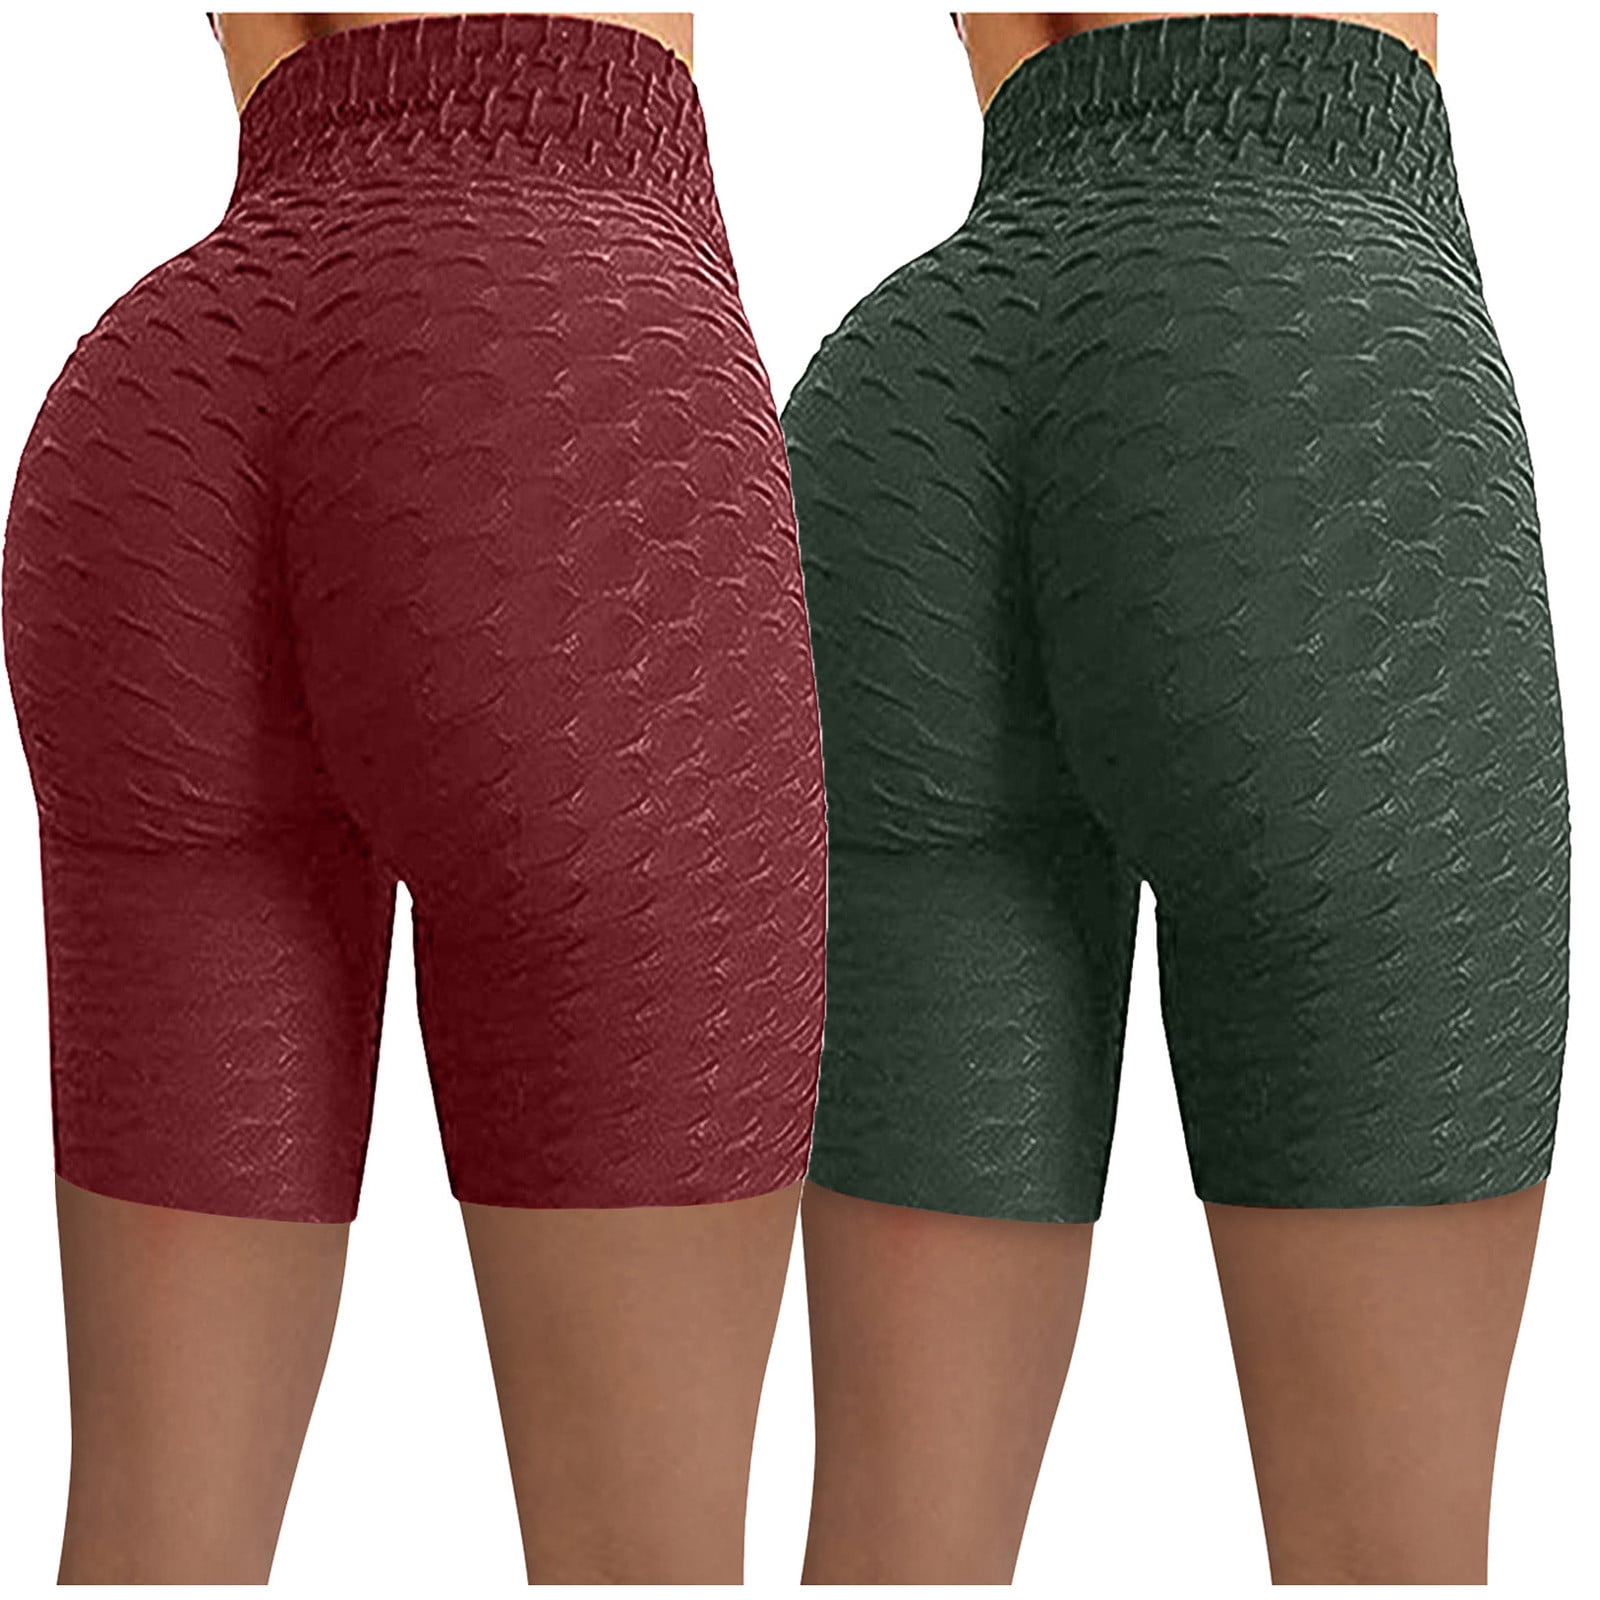 Womens Casual Ribbed Printed High Waist Yoga Pants Workout Running